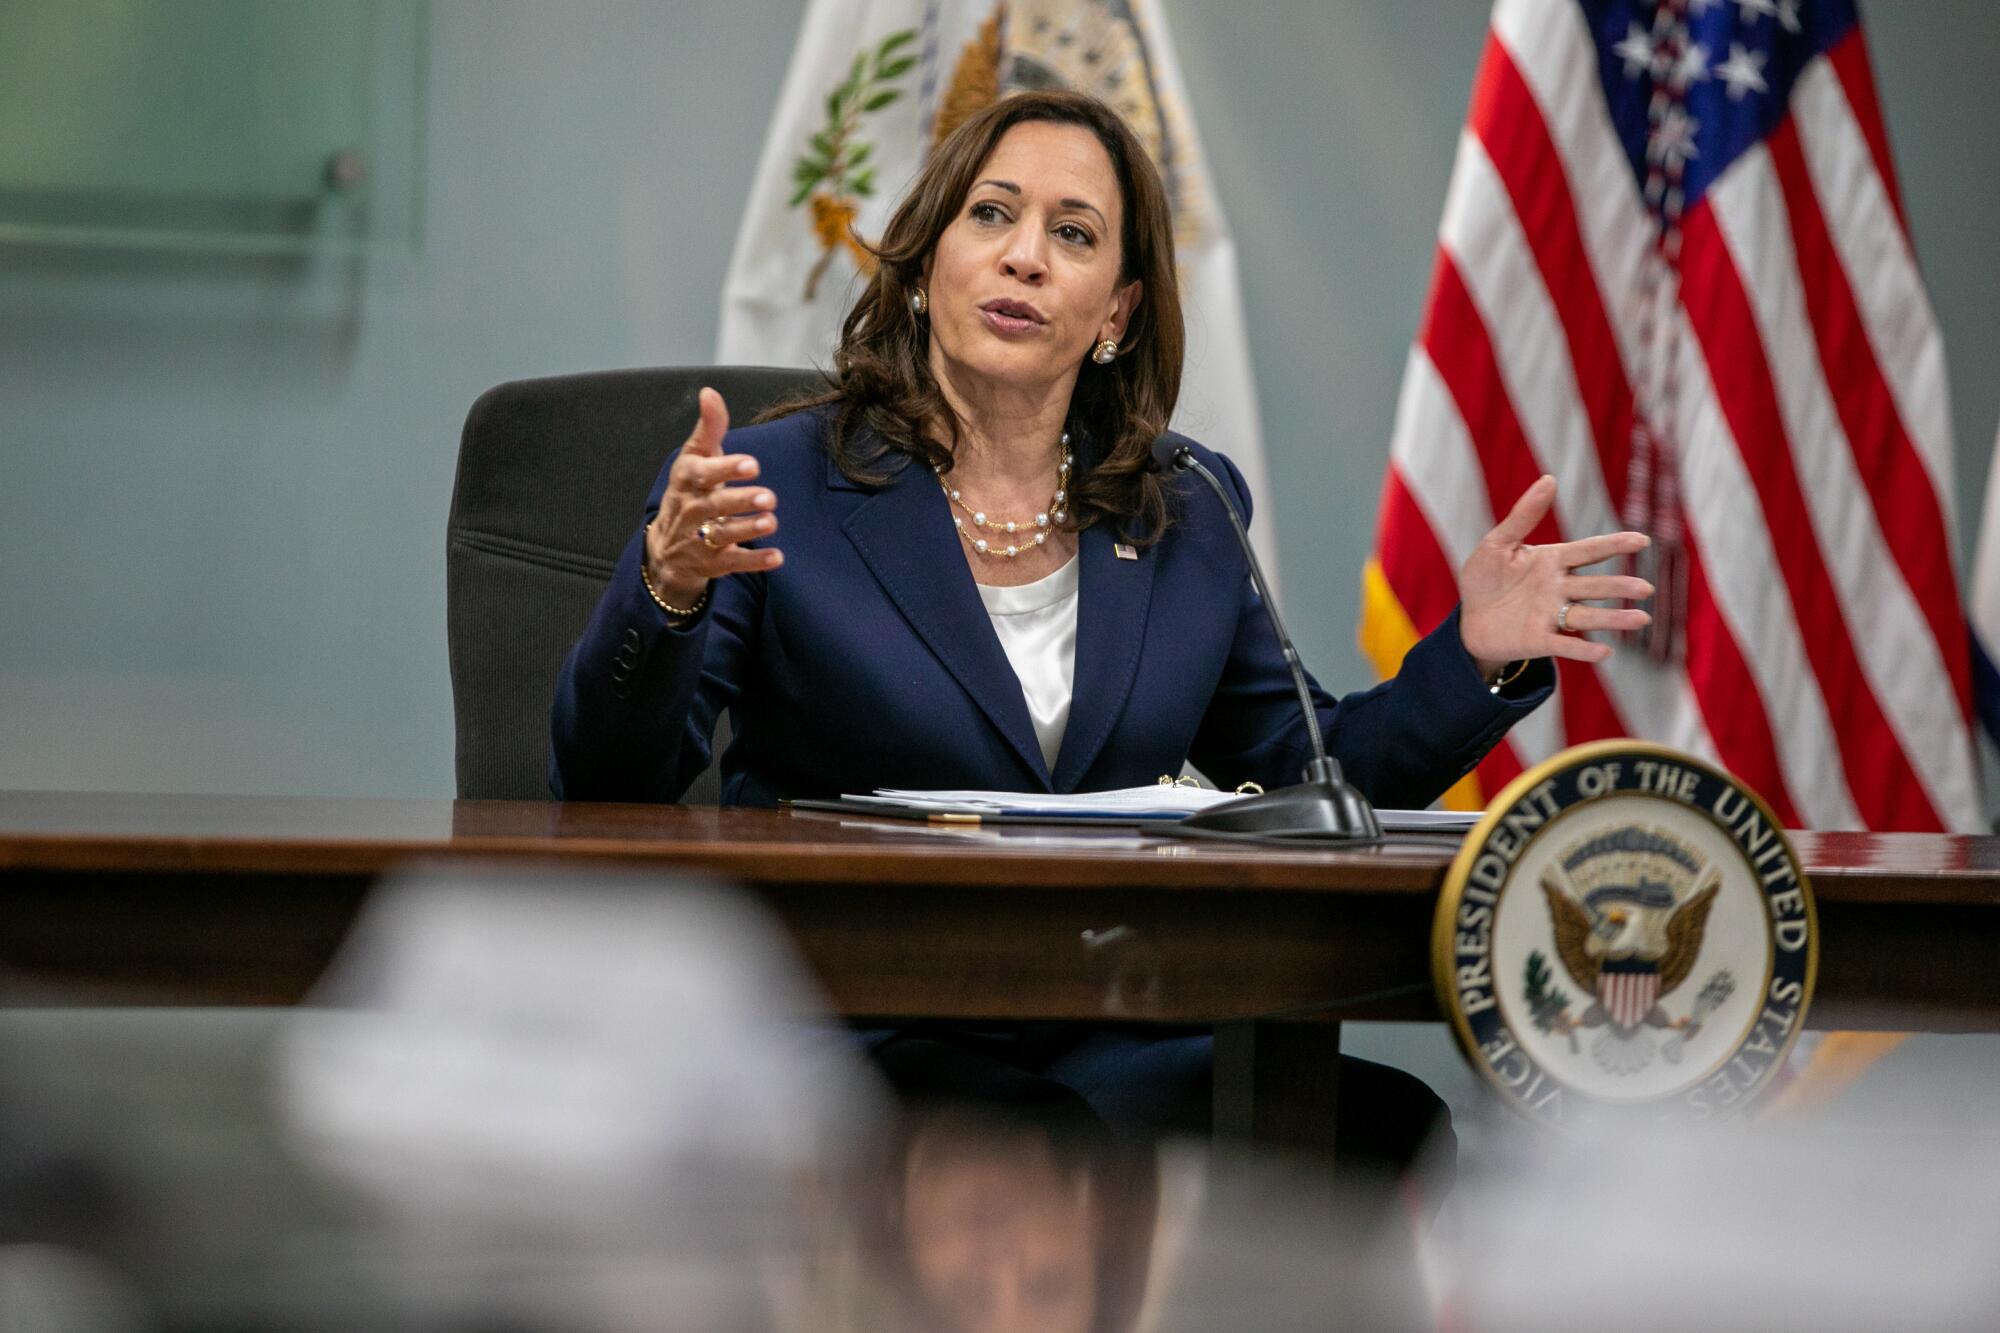 Vice President Kamala Harris speaks seated at a conference table